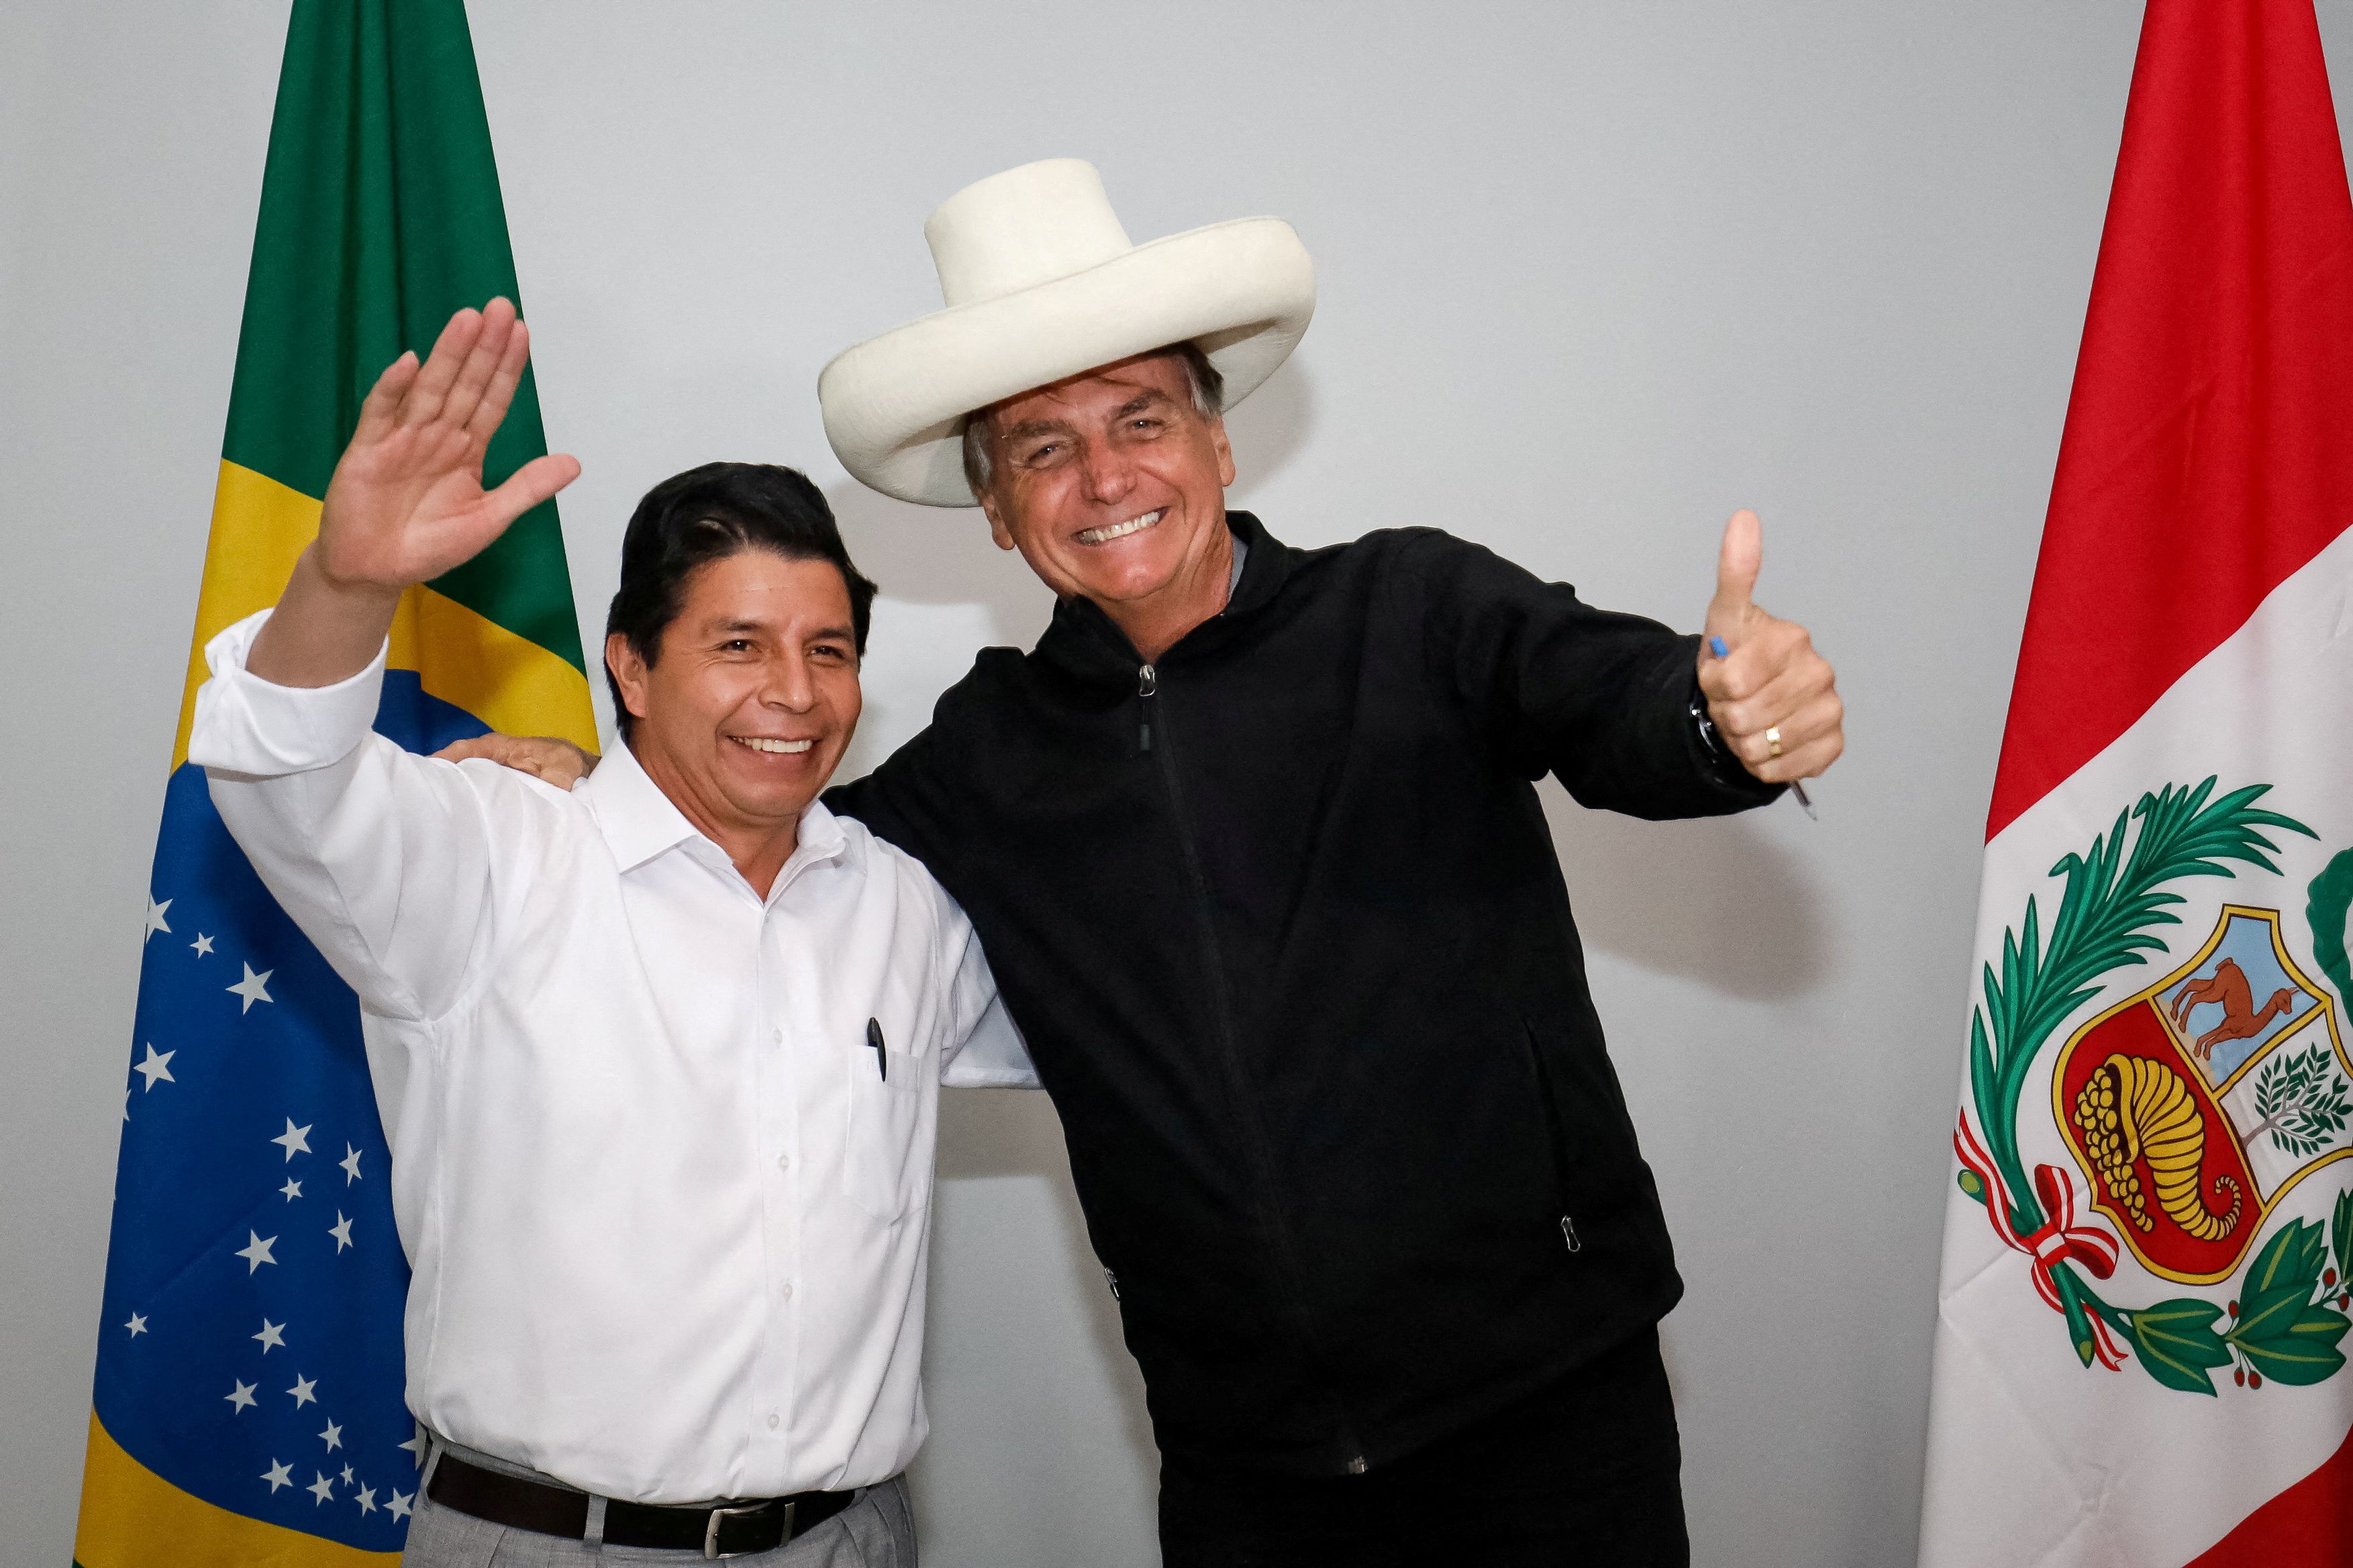 FILE PHOTO: Brazil's President Jair Bolsonaro and his Peruvian counterpart Pedro Castillo wave as they pose for a picture in Porto Velho, Rondonia state, Brazil, February 3, 2022. Alan Santos/Brazilian Presidency/Handout via REUTERS THIS IMAGE HAS BEEN SUPPLIED BY A THIRD PARTY. MANDATORY CREDIT/File Photo